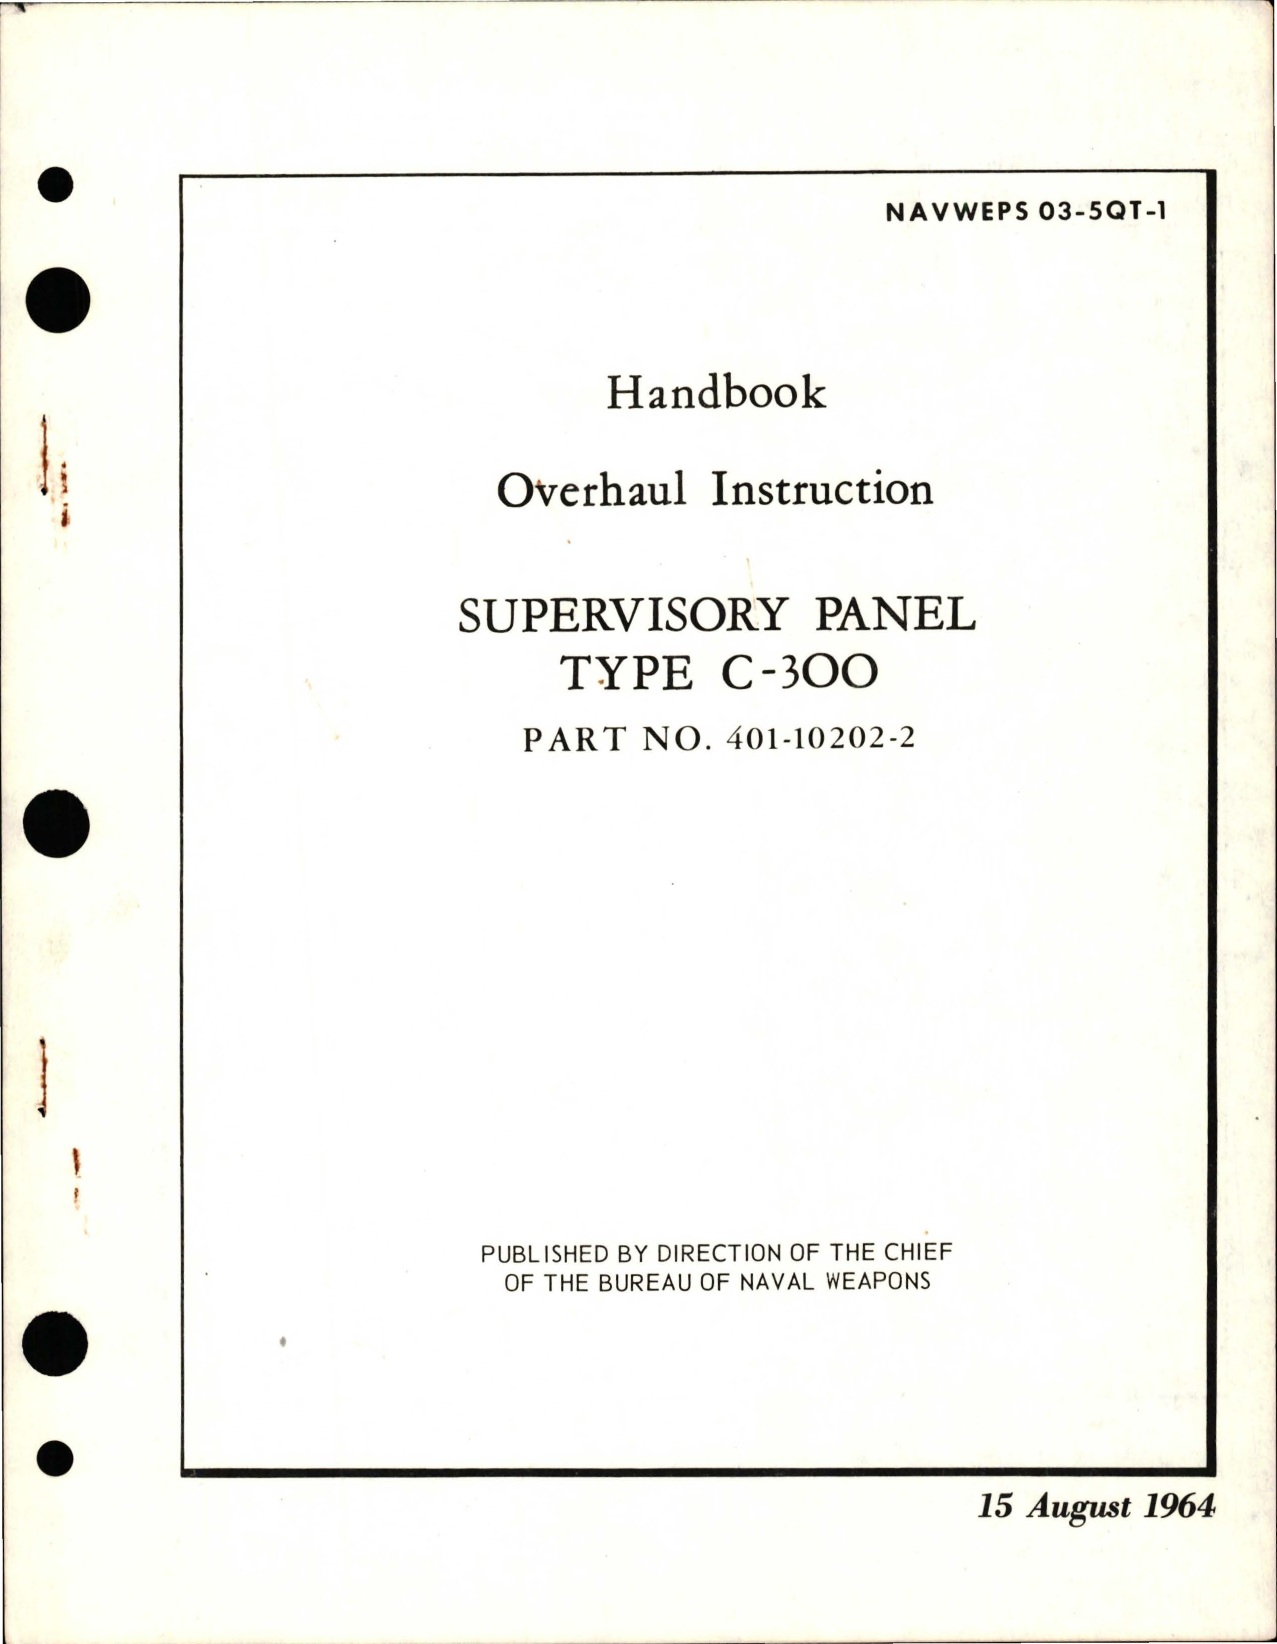 Sample page 1 from AirCorps Library document: Overhaul Instruction for Supervisory Panel - Type C-300 - Part 401-10202-2